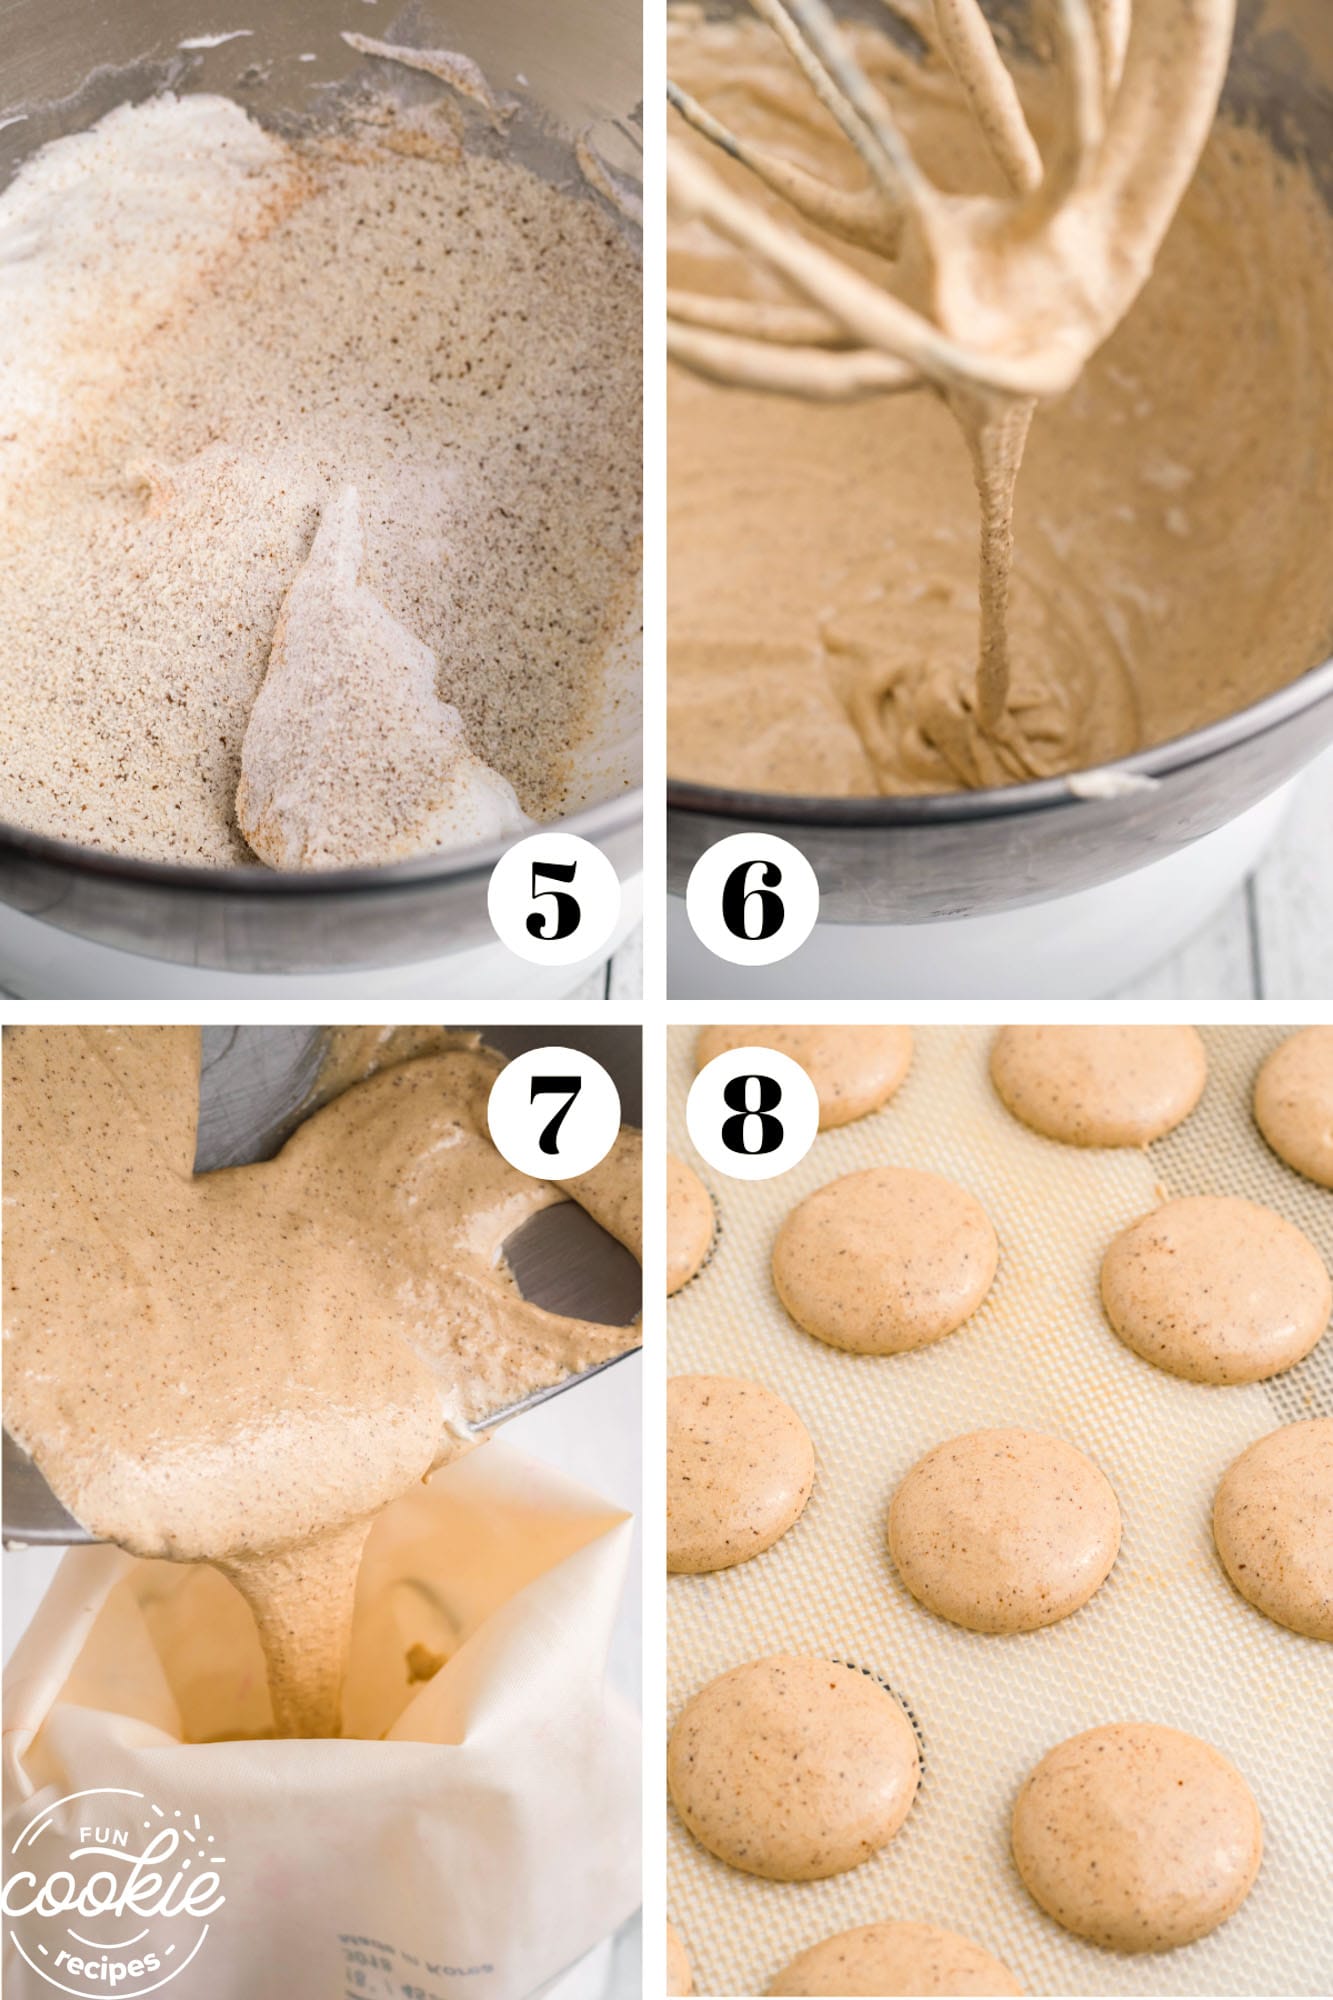 Collage of four images showing how to make coffee macaron shells